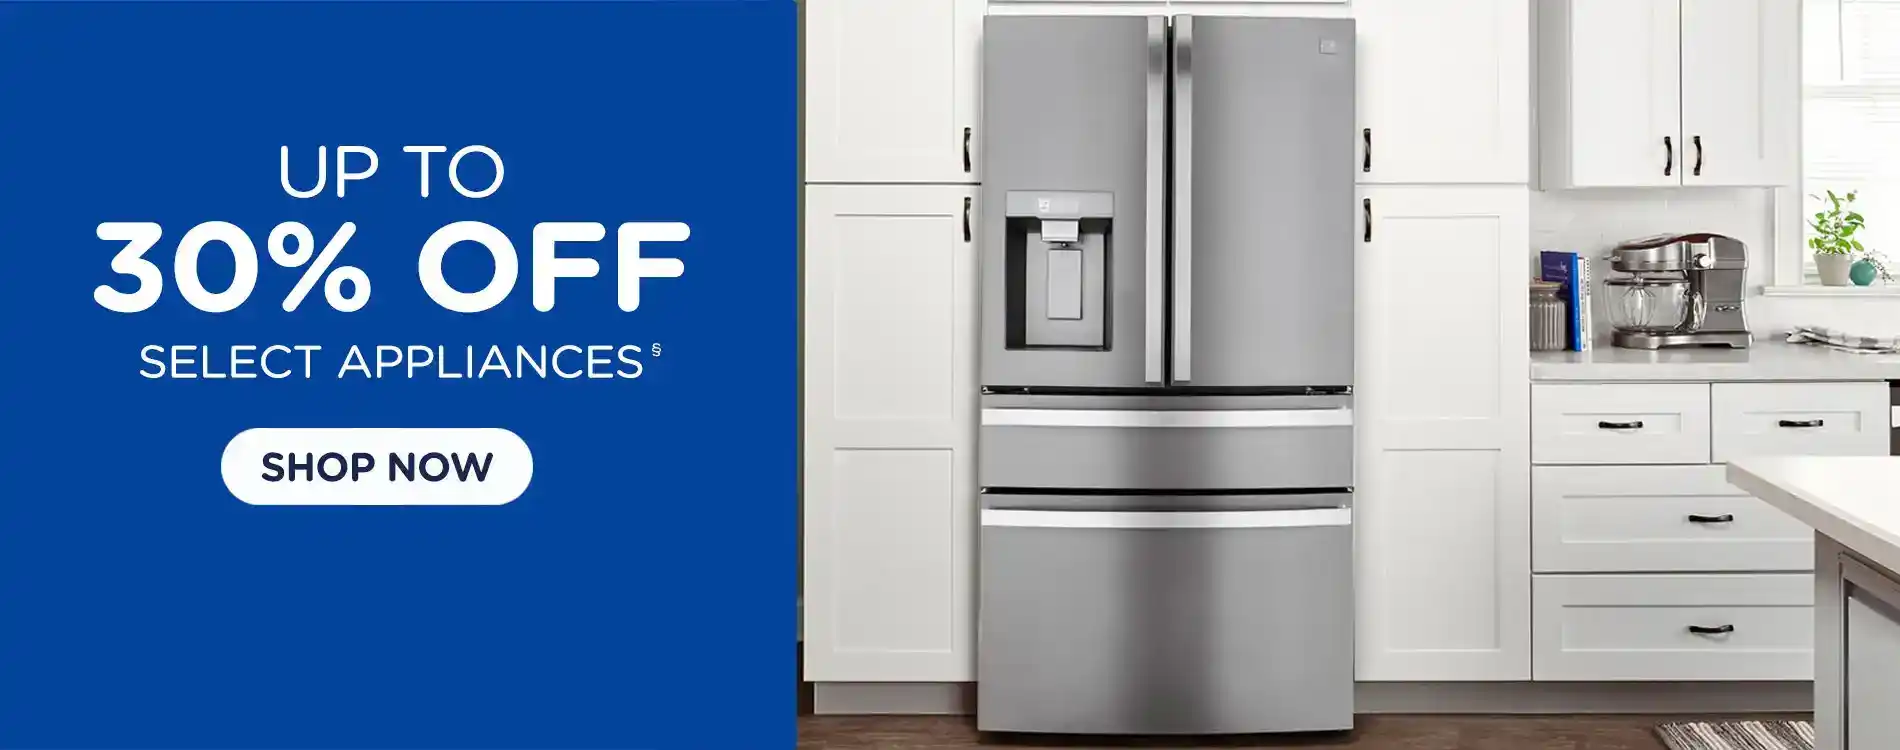 Up to 30% Off select Appliances. Shop now